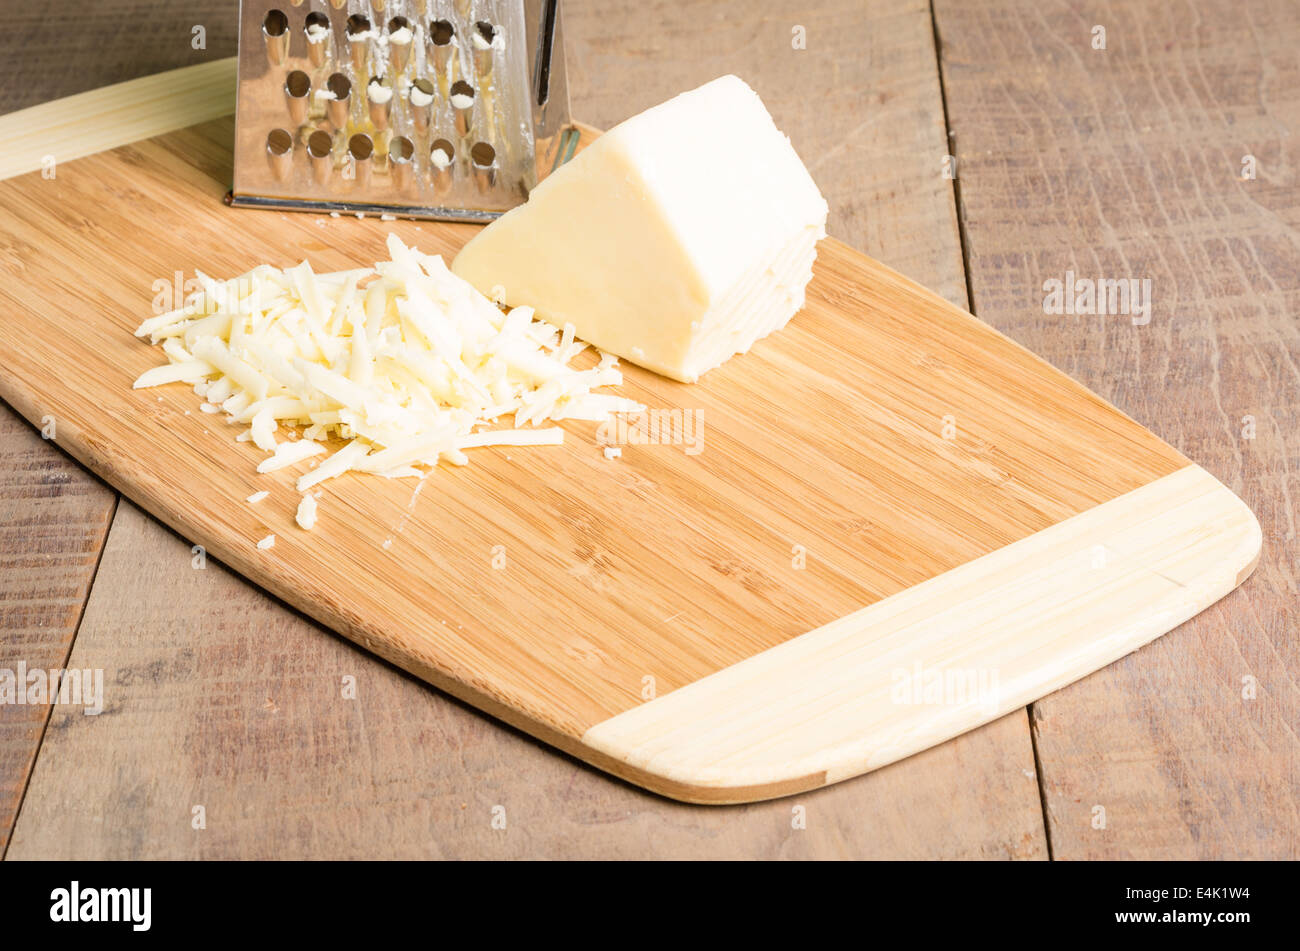 https://c8.alamy.com/comp/E4K1W4/fresh-parmesan-cheese-with-a-metal-grater-on-a-cutting-board-E4K1W4.jpg